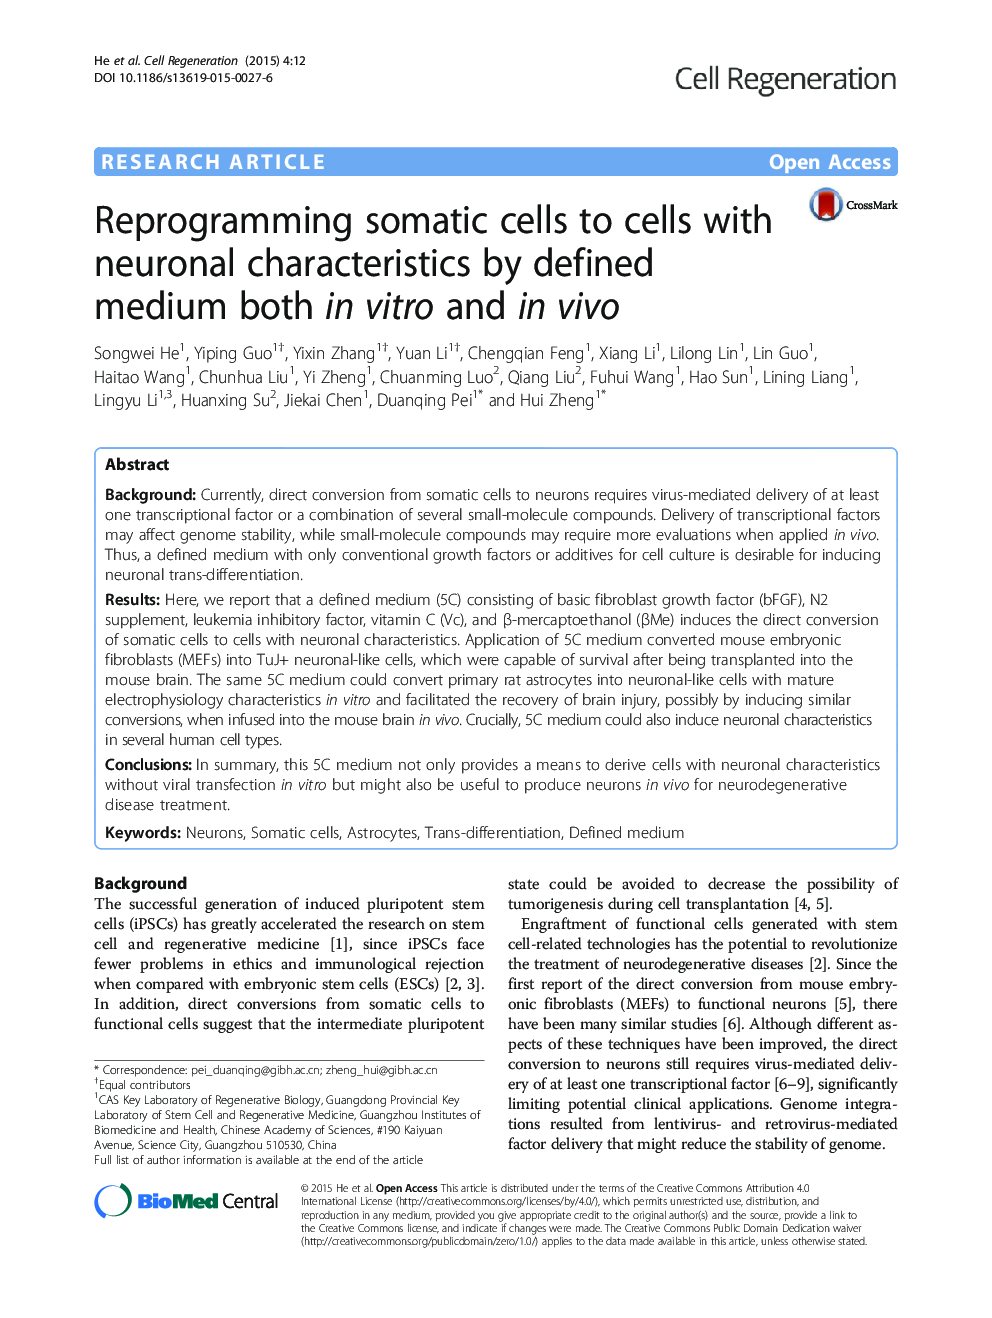 Reprogramming somatic cells to cells with neuronal characteristics by defined medium both in vitro and in vivo